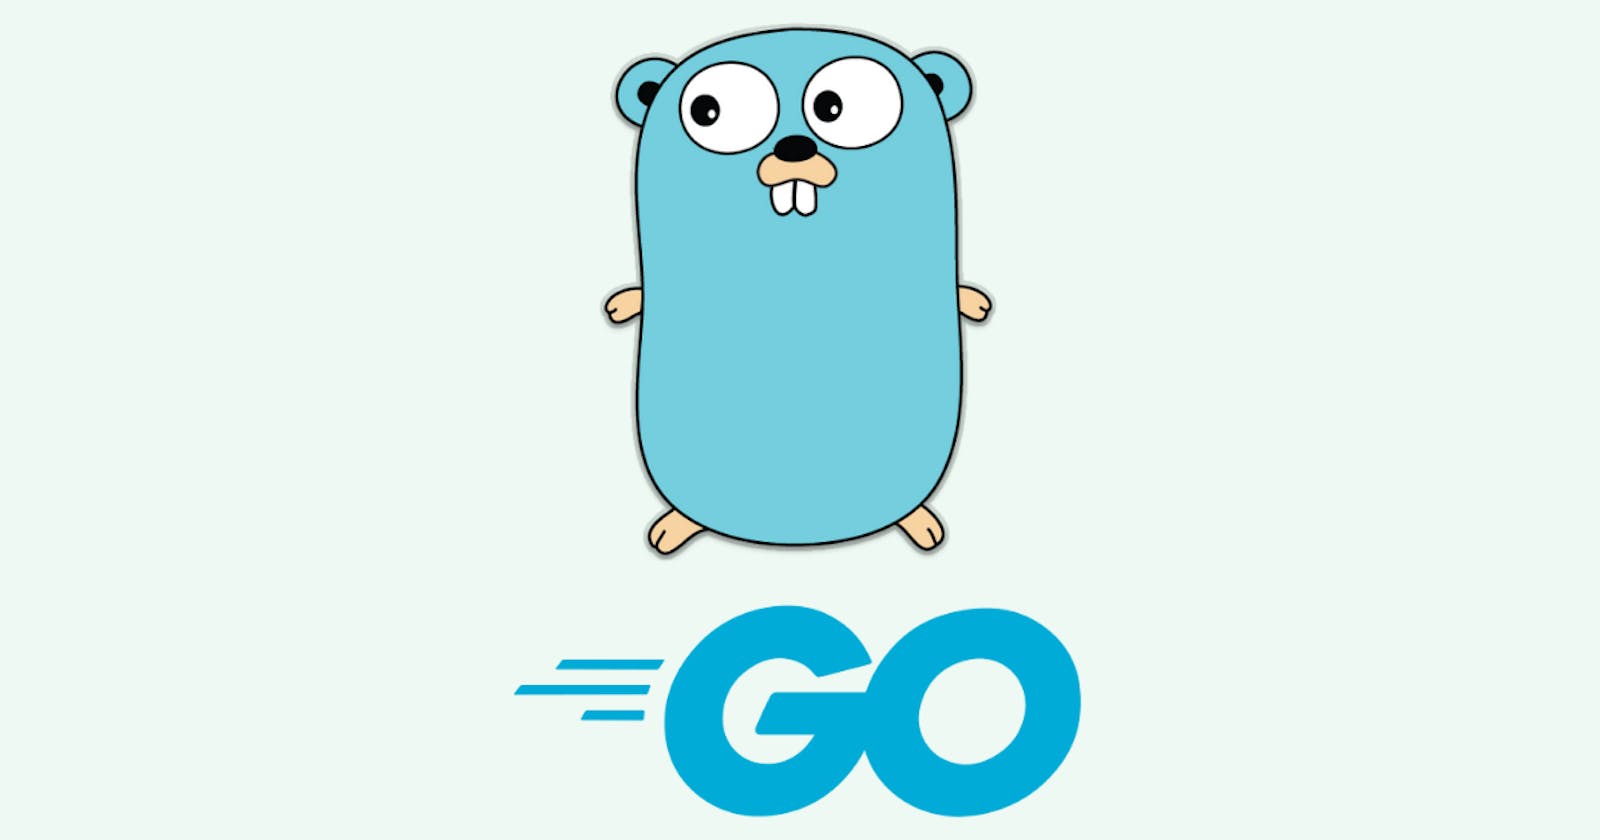 Concurrency in Go